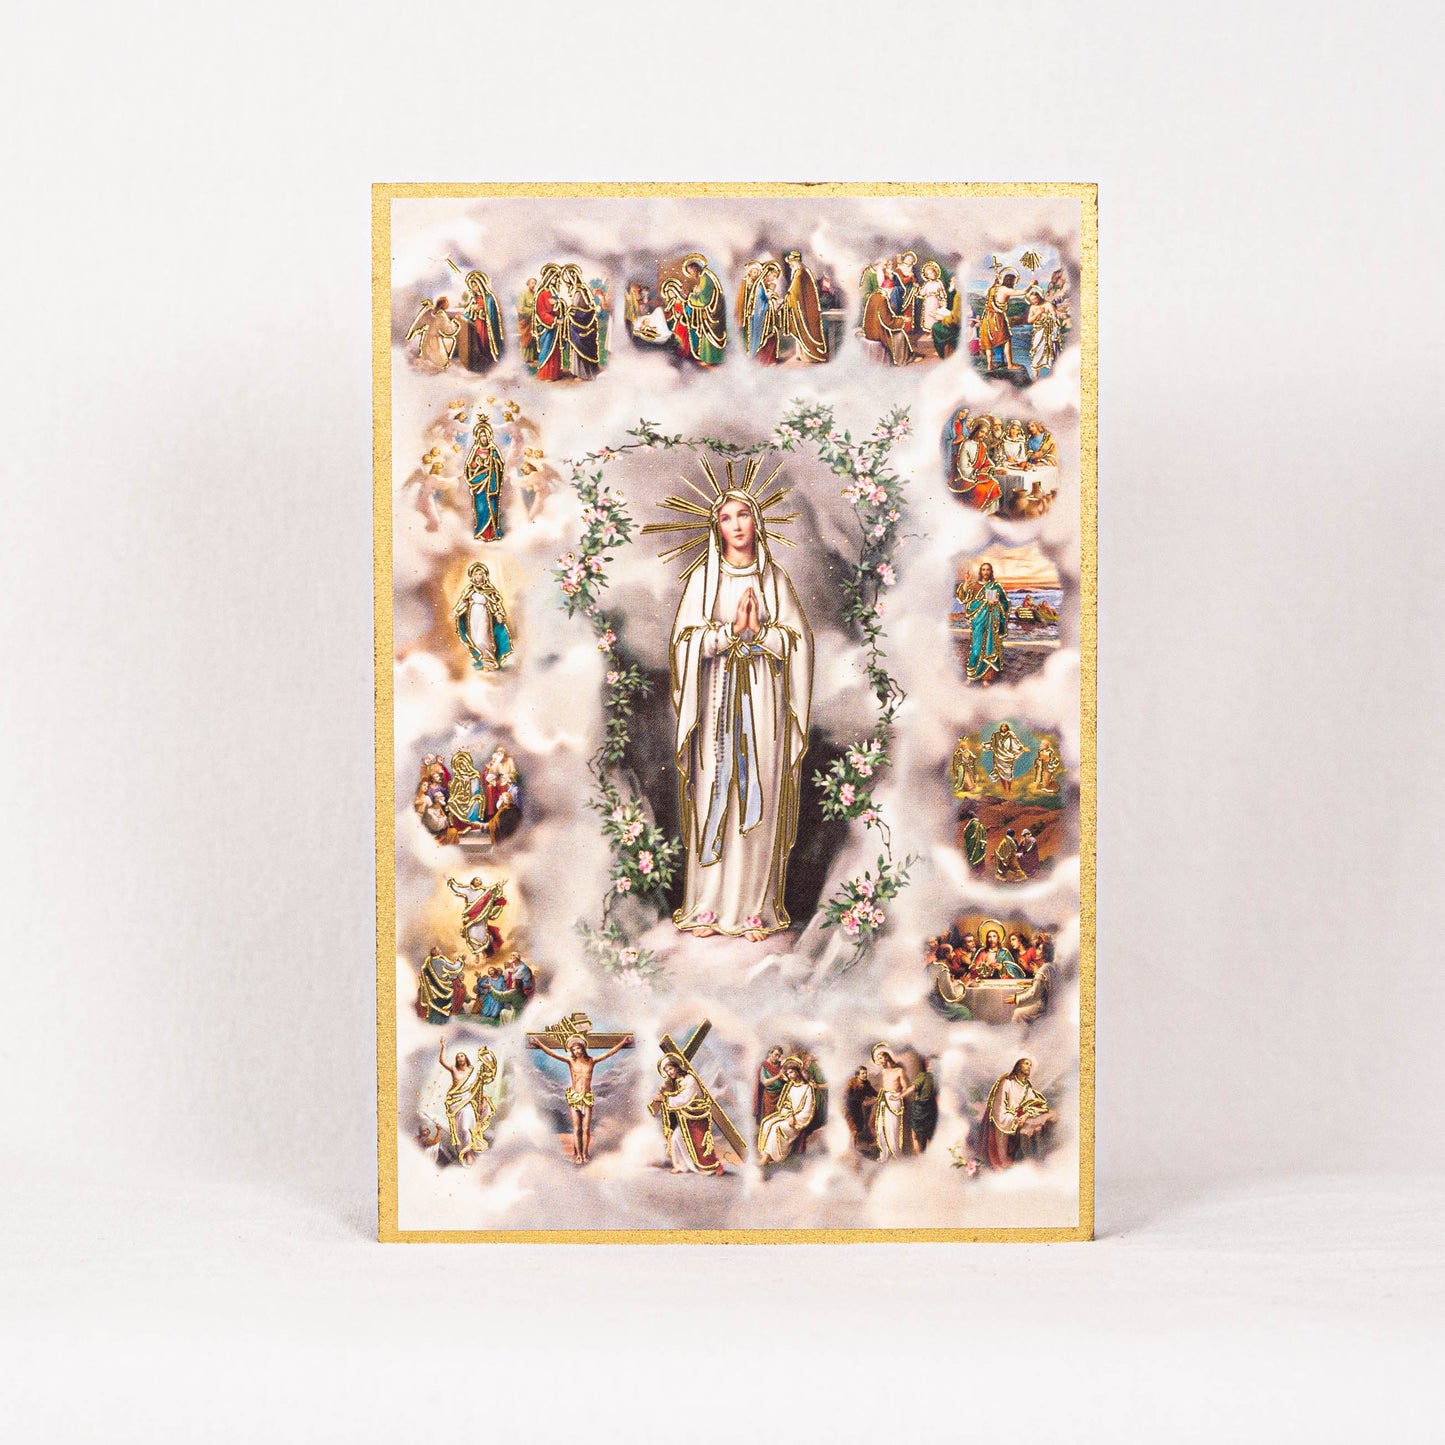 4" x 6" Mystery of the Rosary Gold Foil Mosaic Plaque